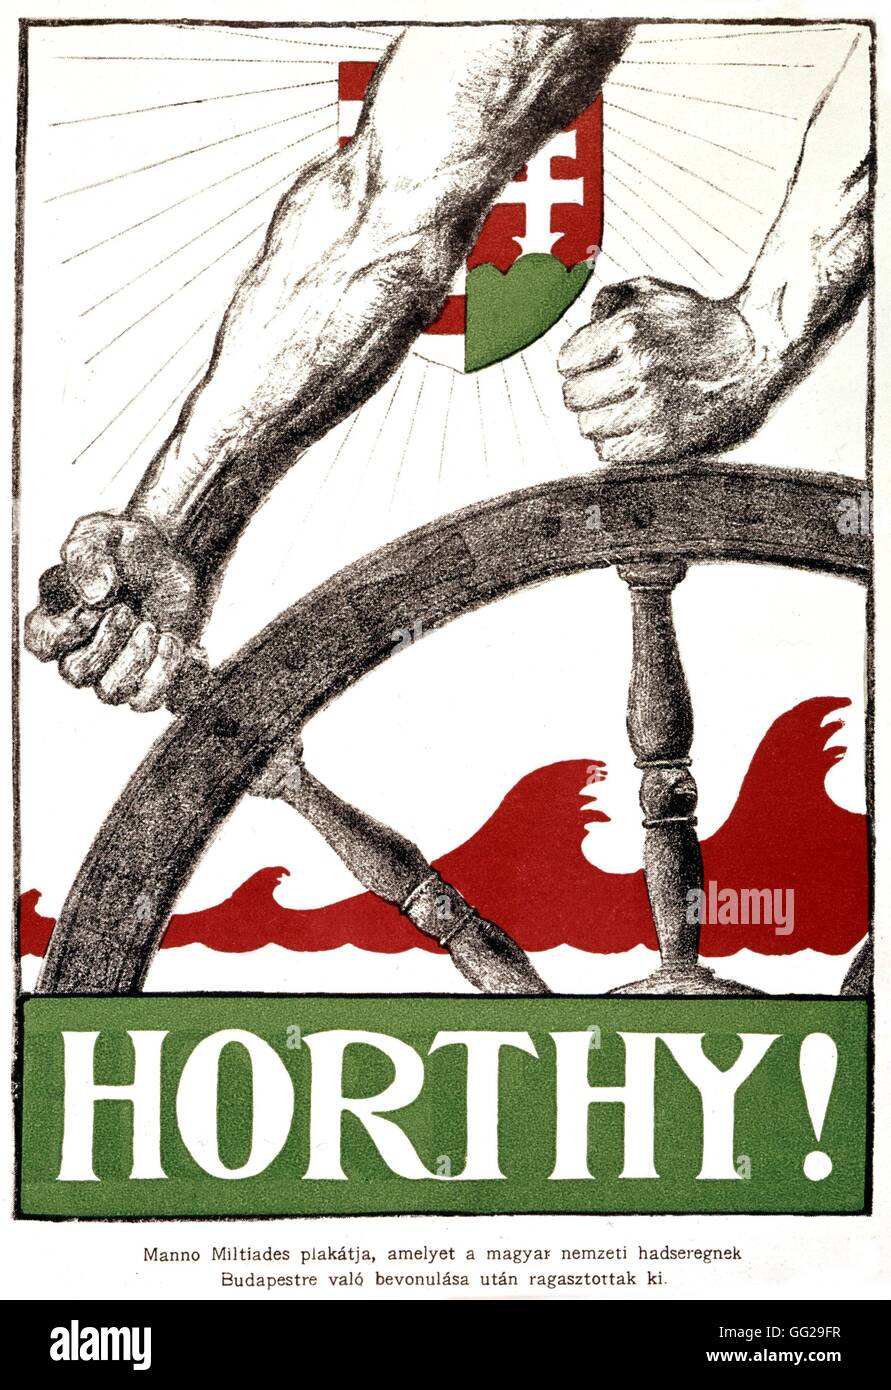 Poster by Manno Mitiades in honour of Hungarian politician Horthy (1868-1957) 1930 Hungary Paris. B.D.I.C. Stock Photo